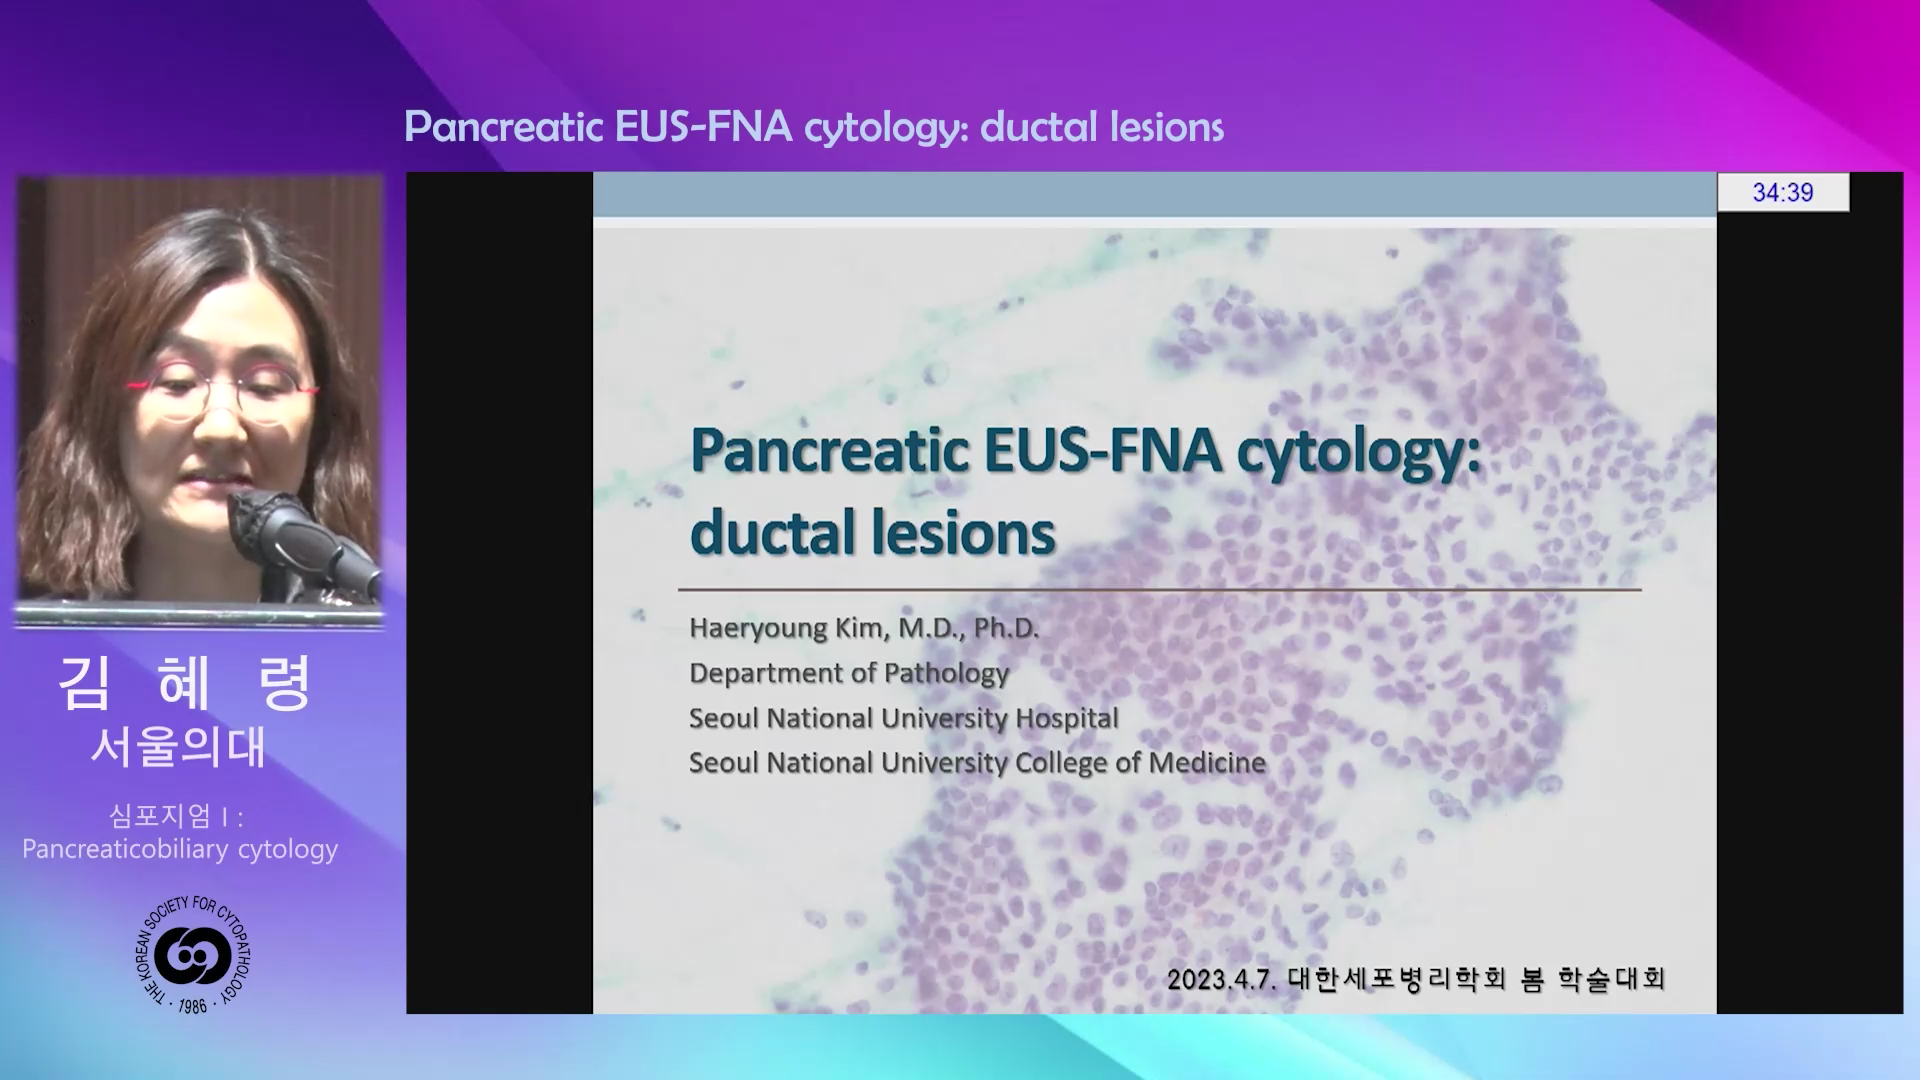 Pancreatic EUS-FNA cytology: ductal lesions